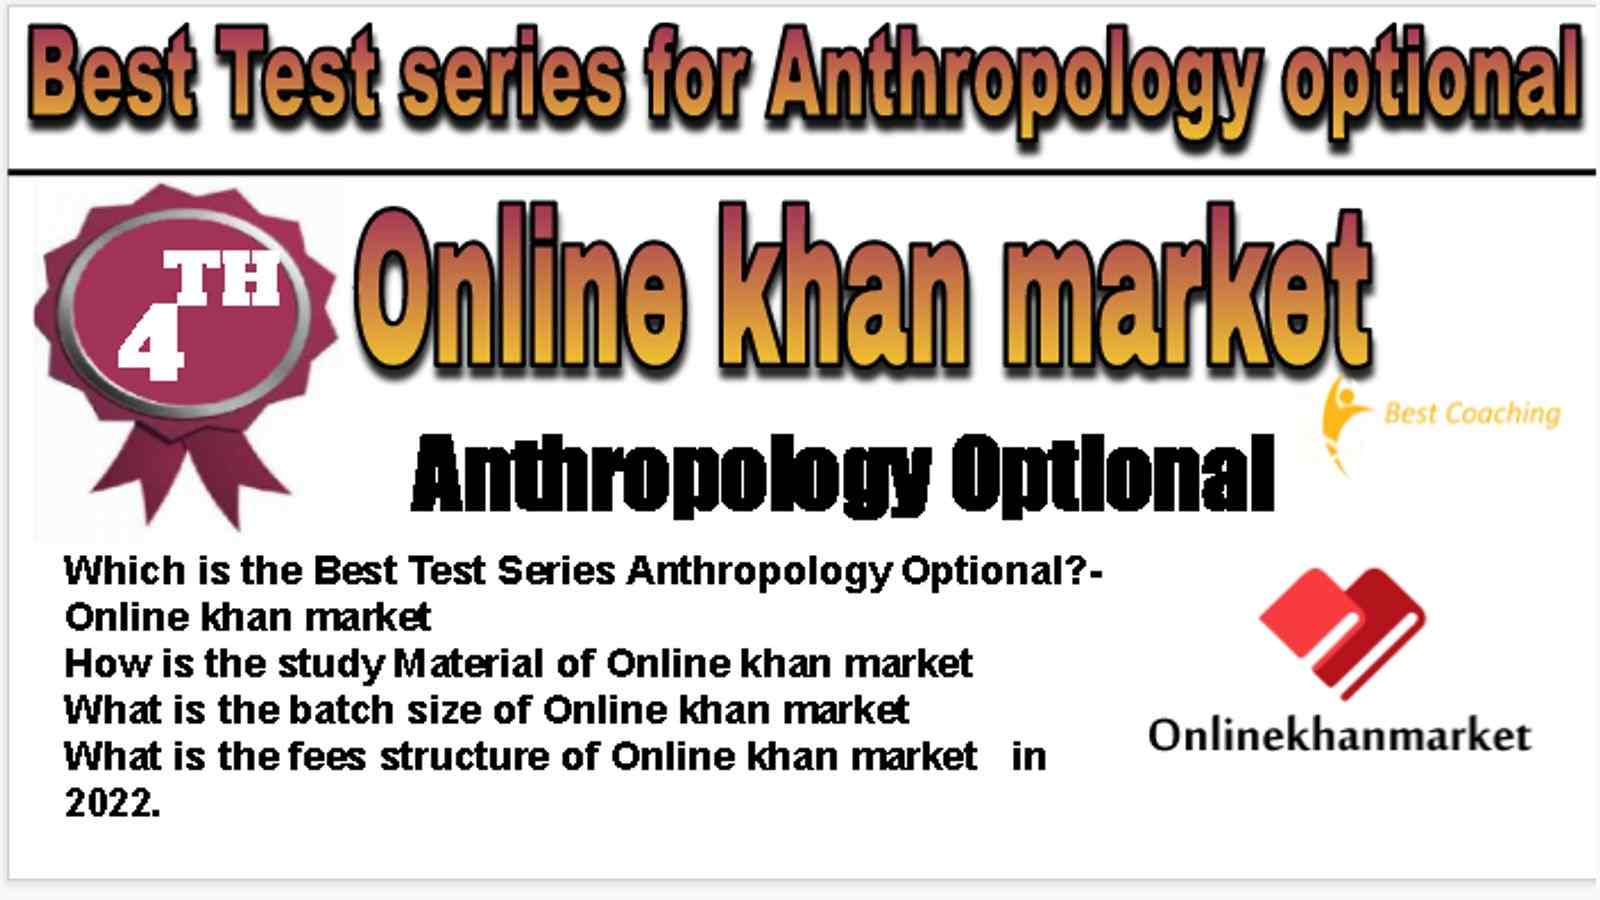 Rank 4 Best Test series for Anthropology optional